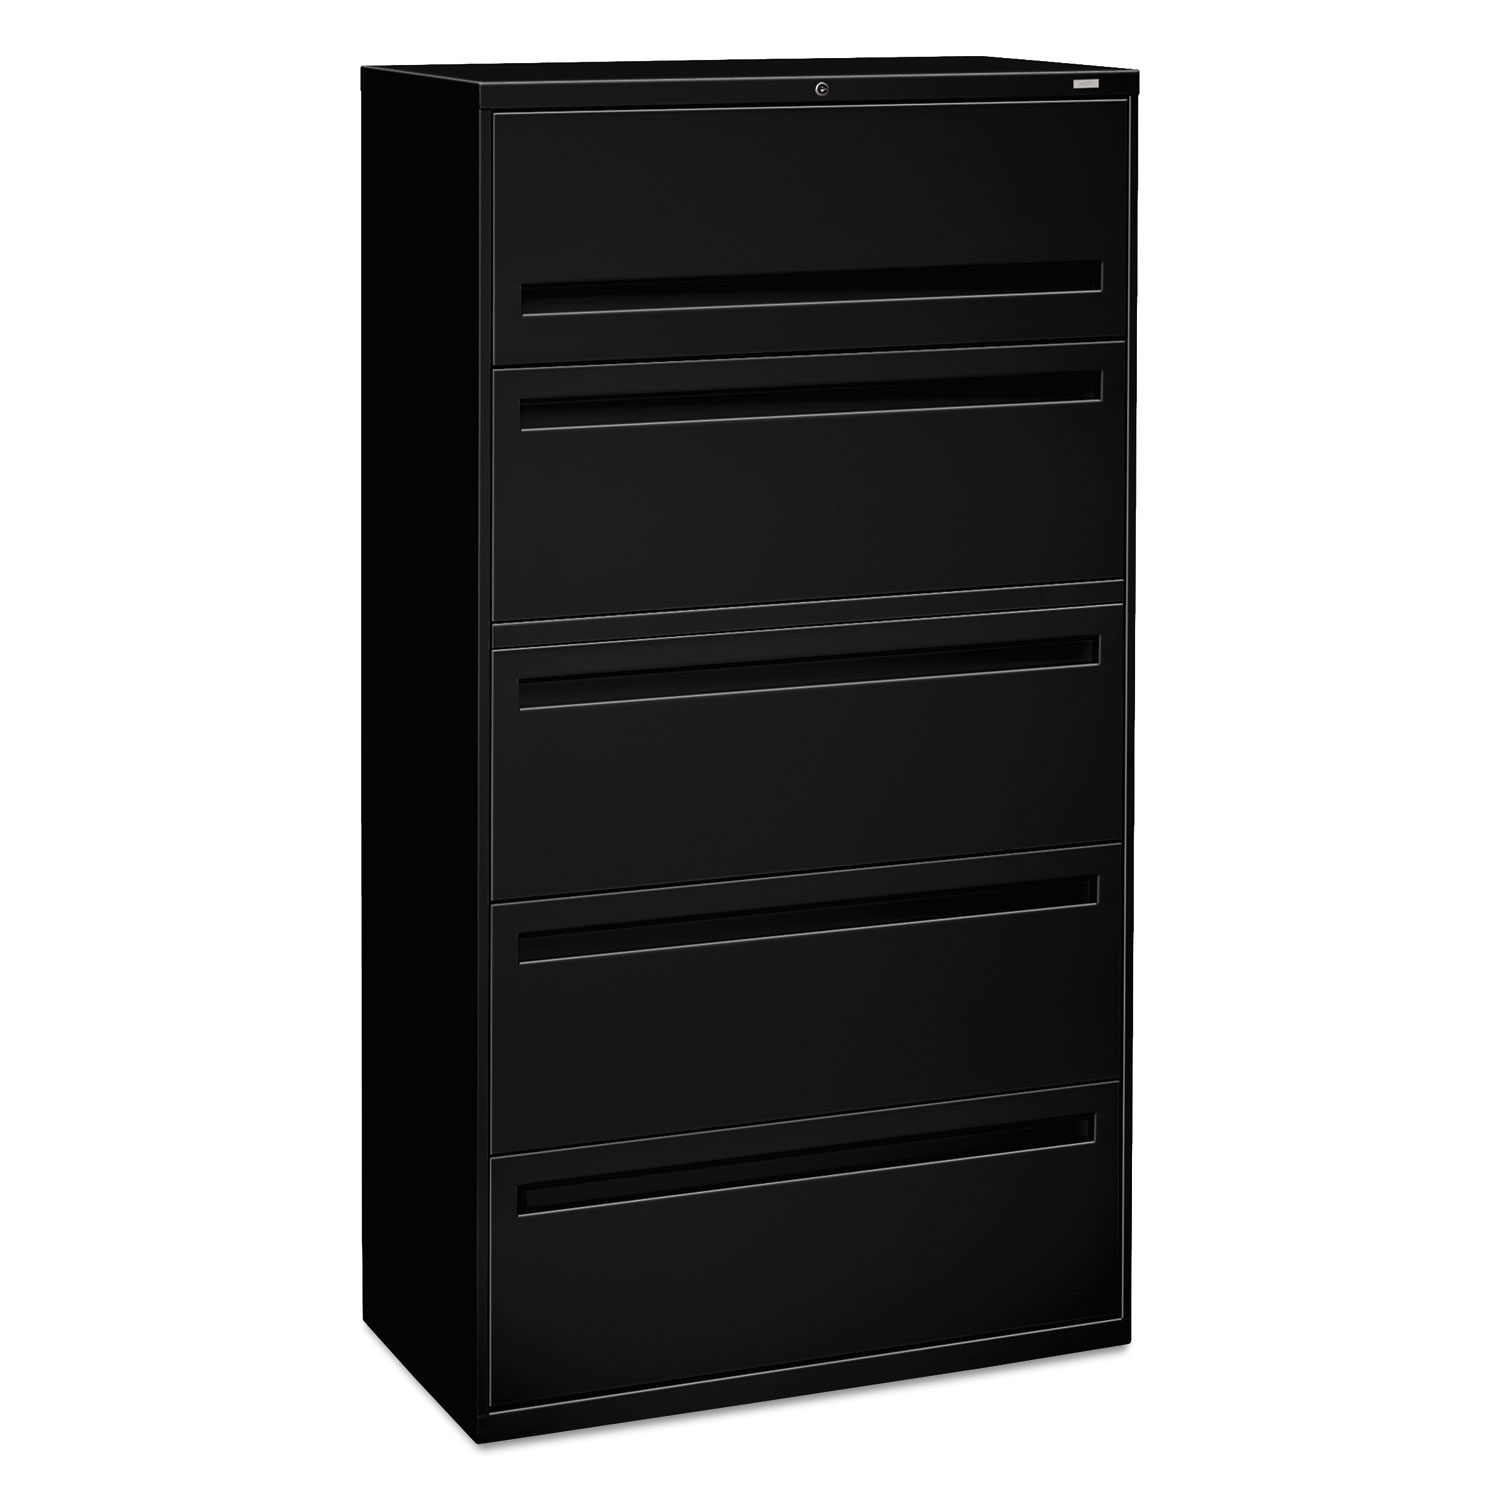 700 Series Five-Drawer Lateral File w/Roll-Out Shelf, 36w x 18d x 64 1/4h, Black